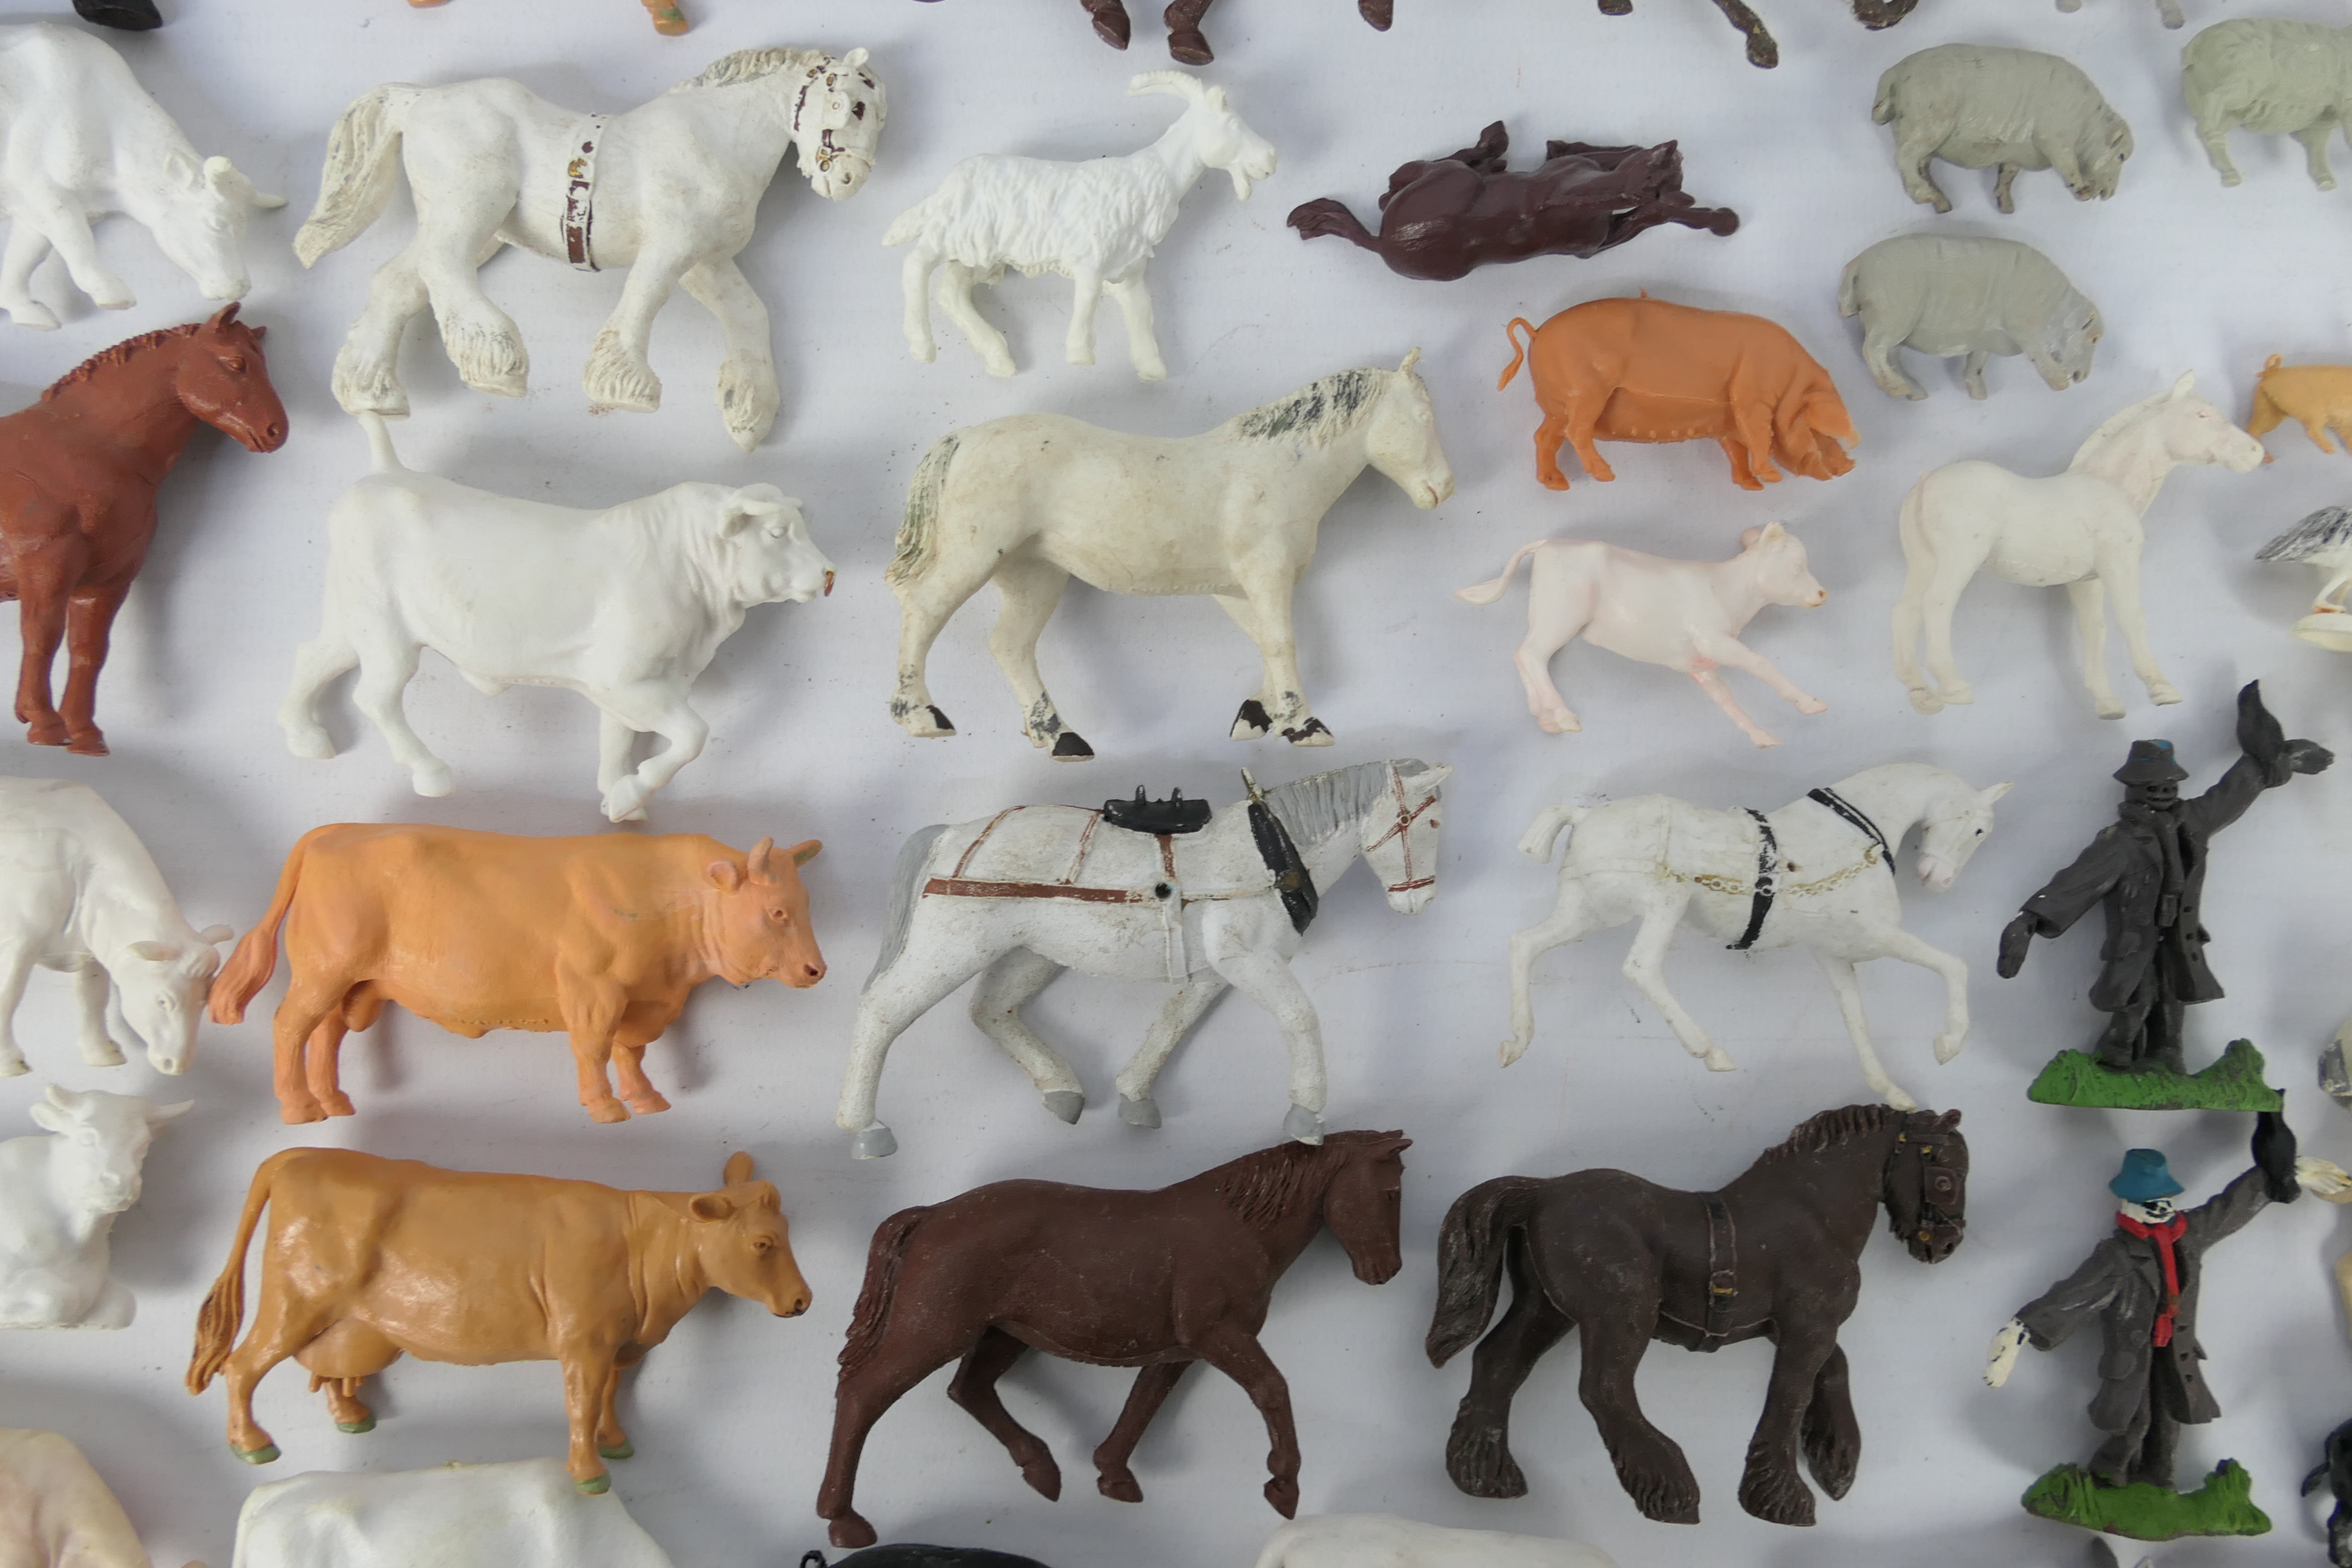 Britains - Cherilea - Other - A loose herd of Britains and Britains style plastic farm animals and - Image 6 of 6